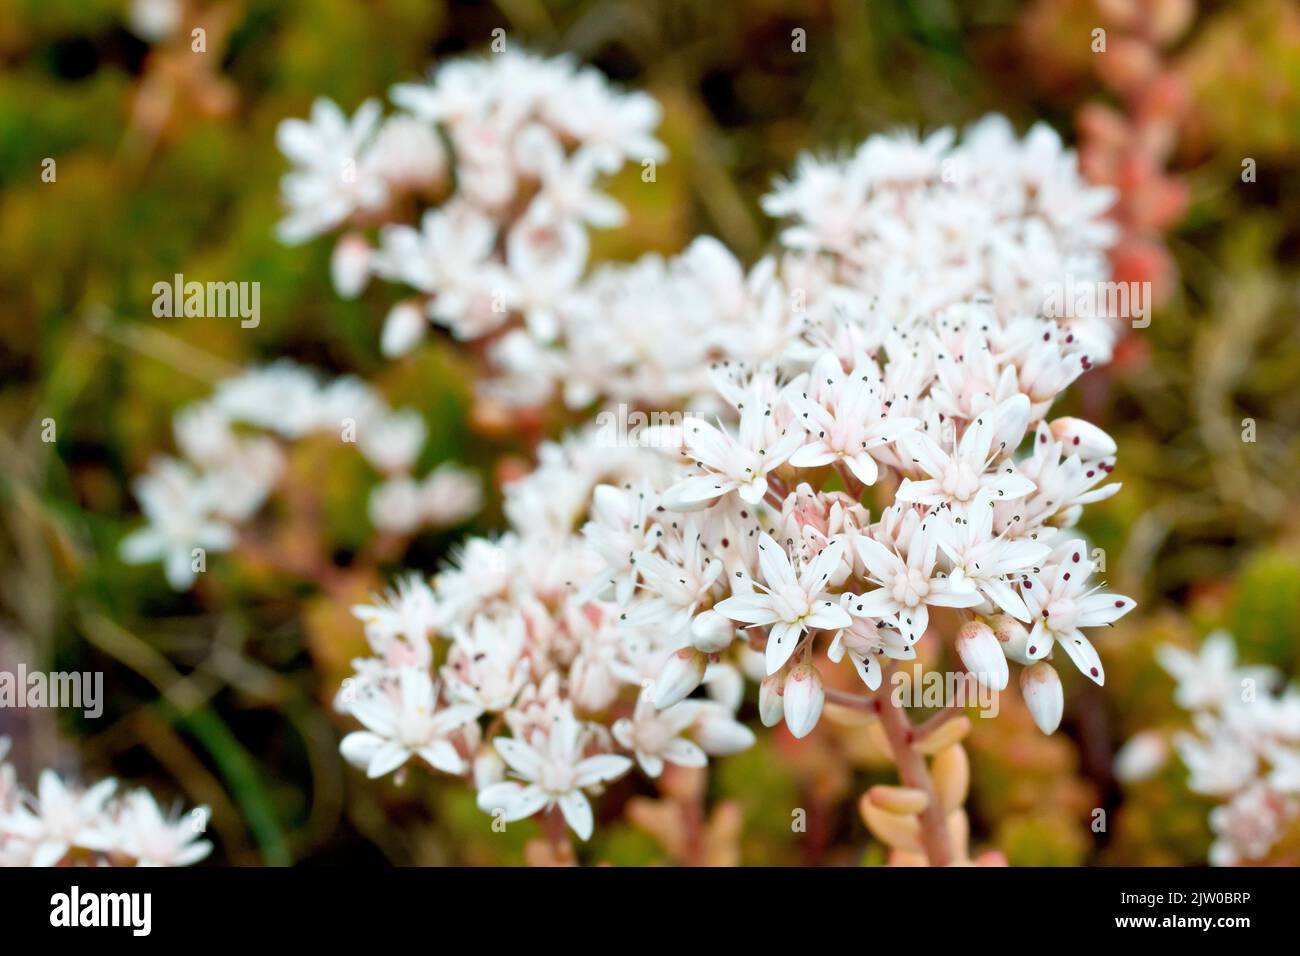 White Stonecrop (sedum album), close up of a small cluster of white flowers with limited depth of field. Stock Photo